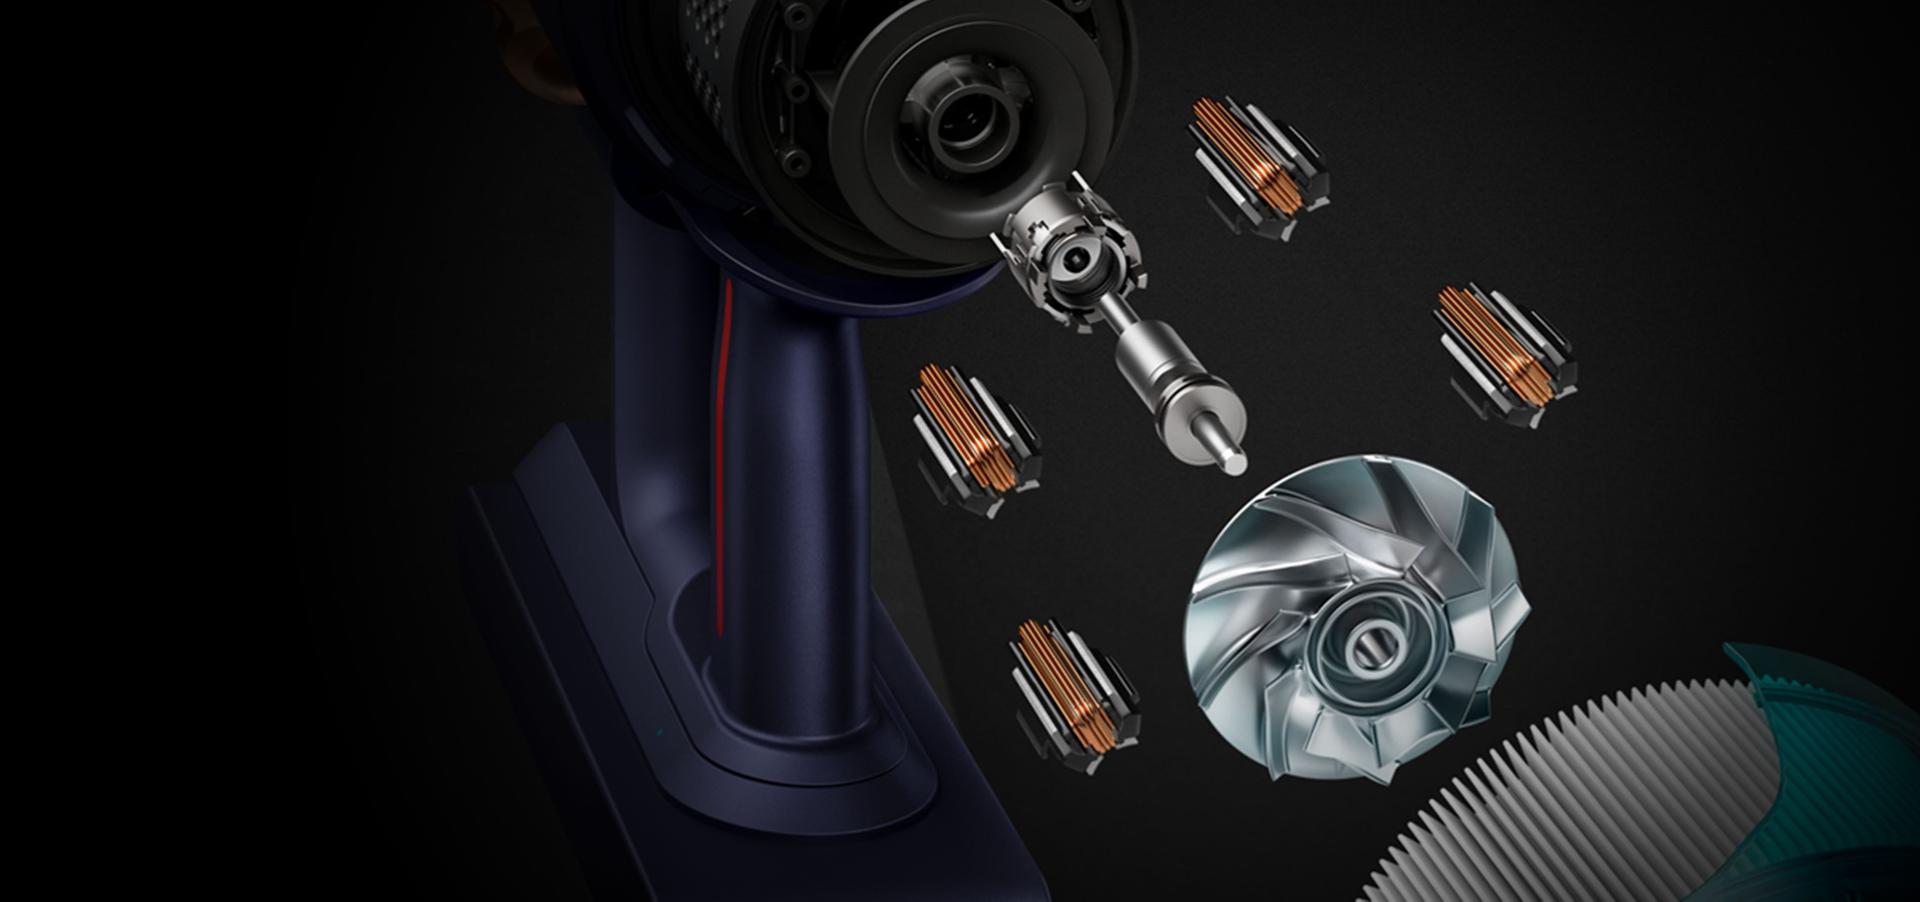 Cutaway of the motor inside Dyson's most powerful cordless vacuum.